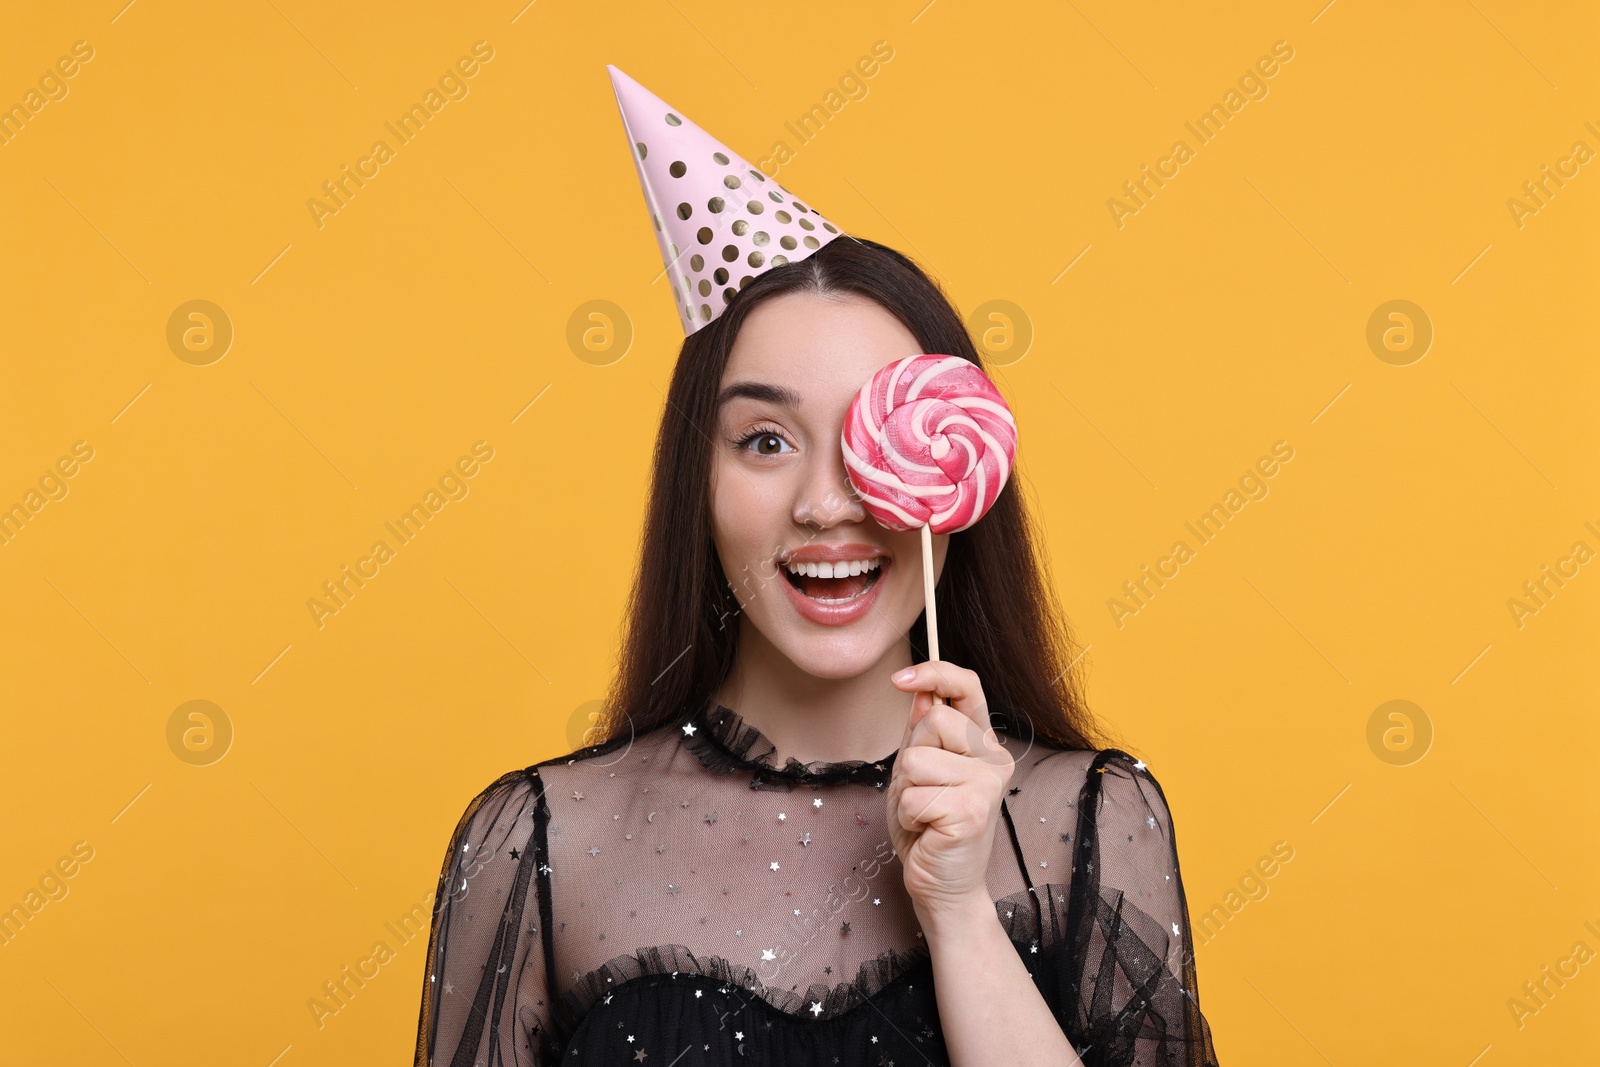 Photo of Happy woman in party hat holding lollipop on orange background